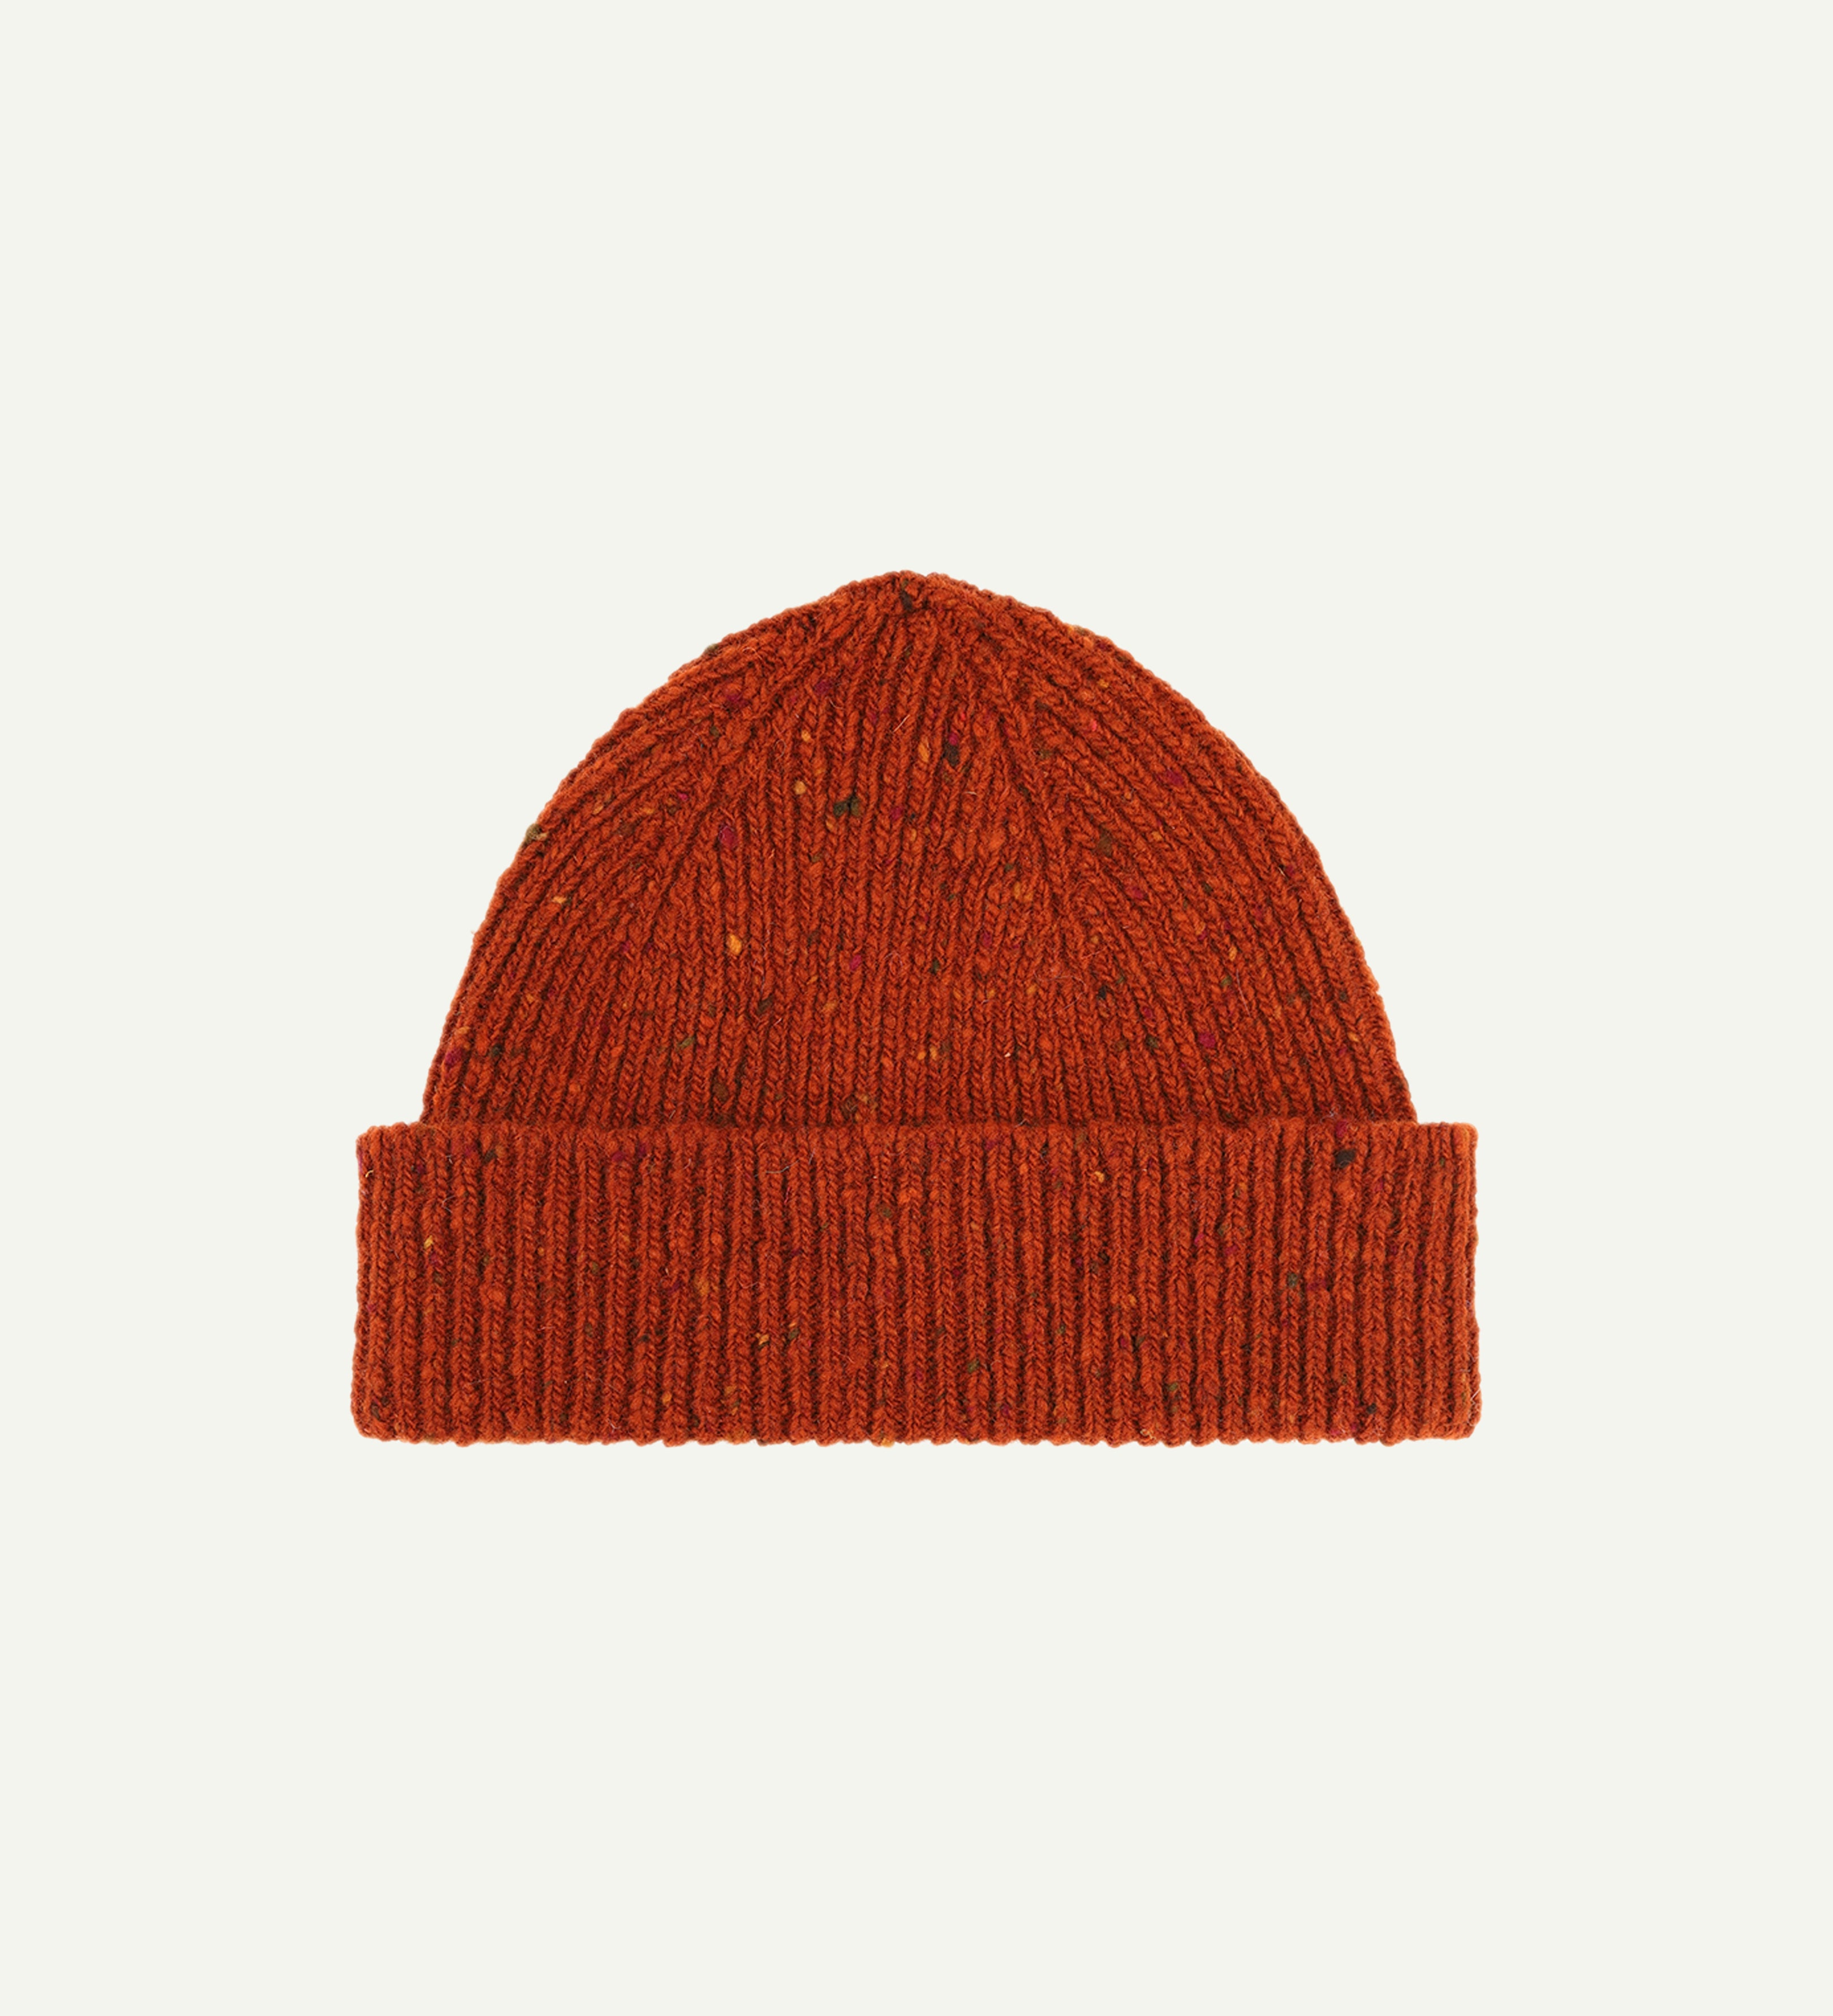  Flat view of Uskees 4003 'burnt orange' donegal wool hat, with a clear view of the adjustable cuff. Clearly showing the 'speckled' detail of the wool hat.